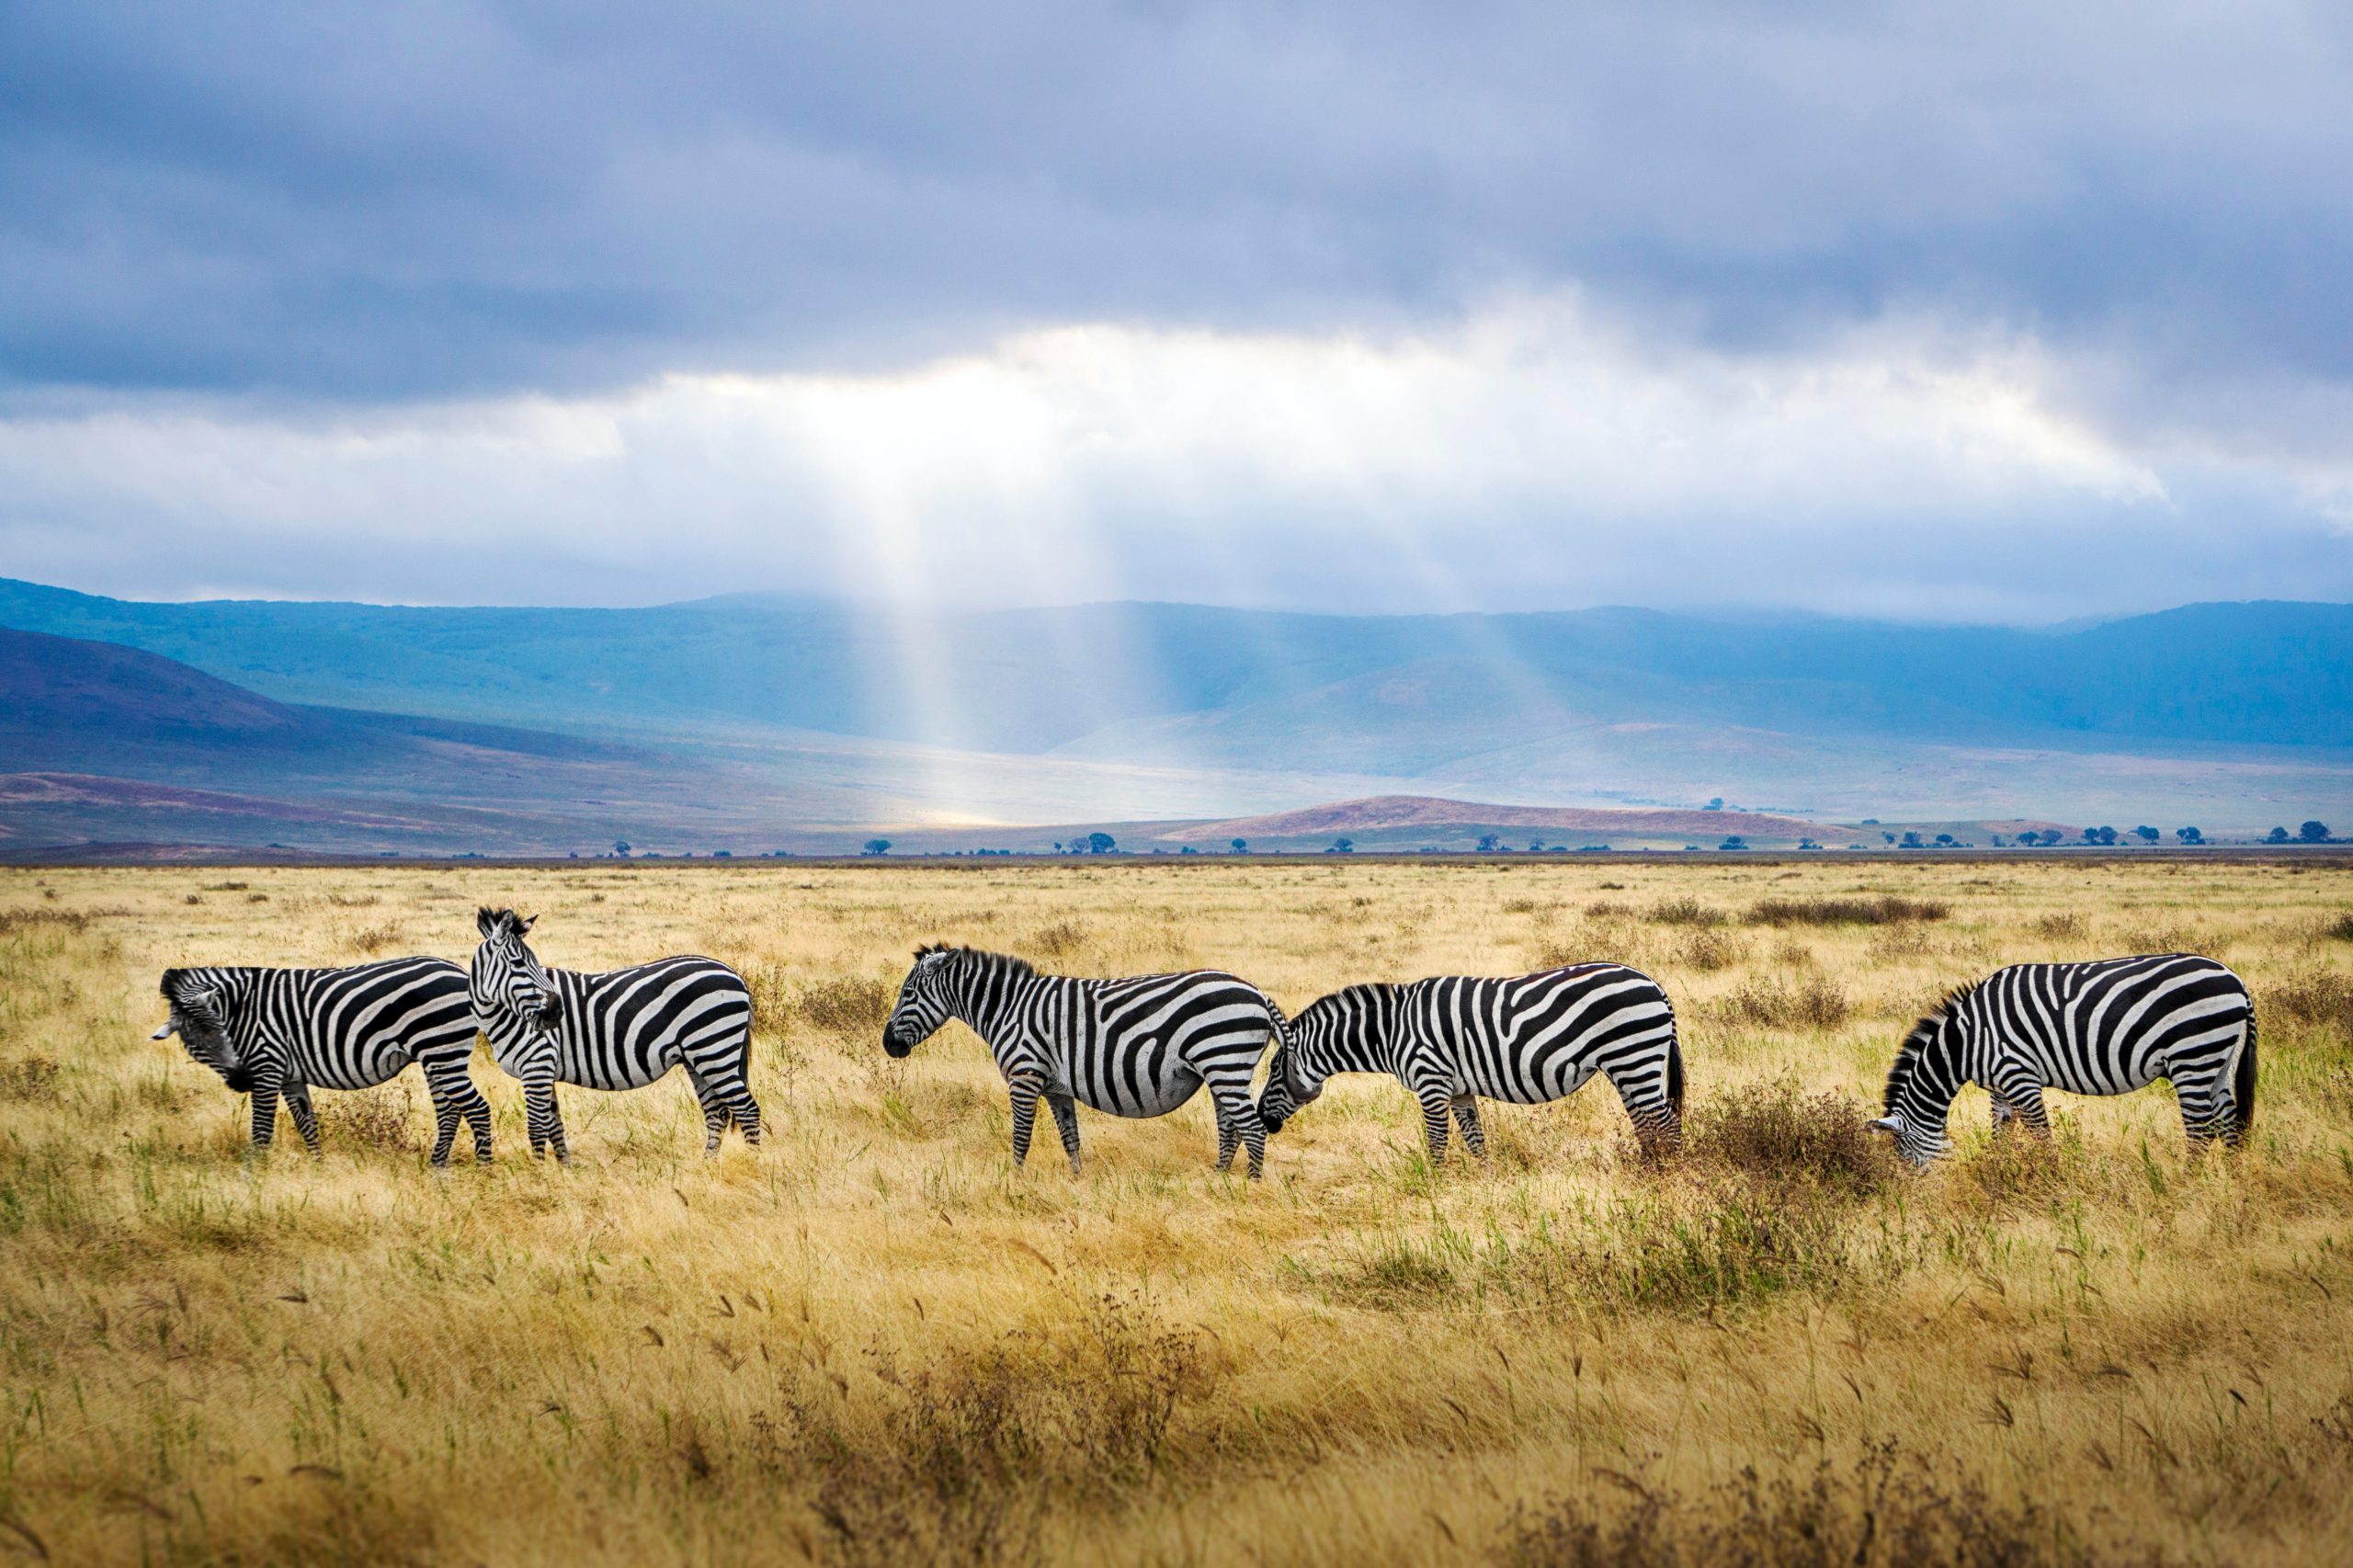 A WEEK COMBINING THE SERENGETI NATIONAL PARK & THE SELOUS GAME RESERVE